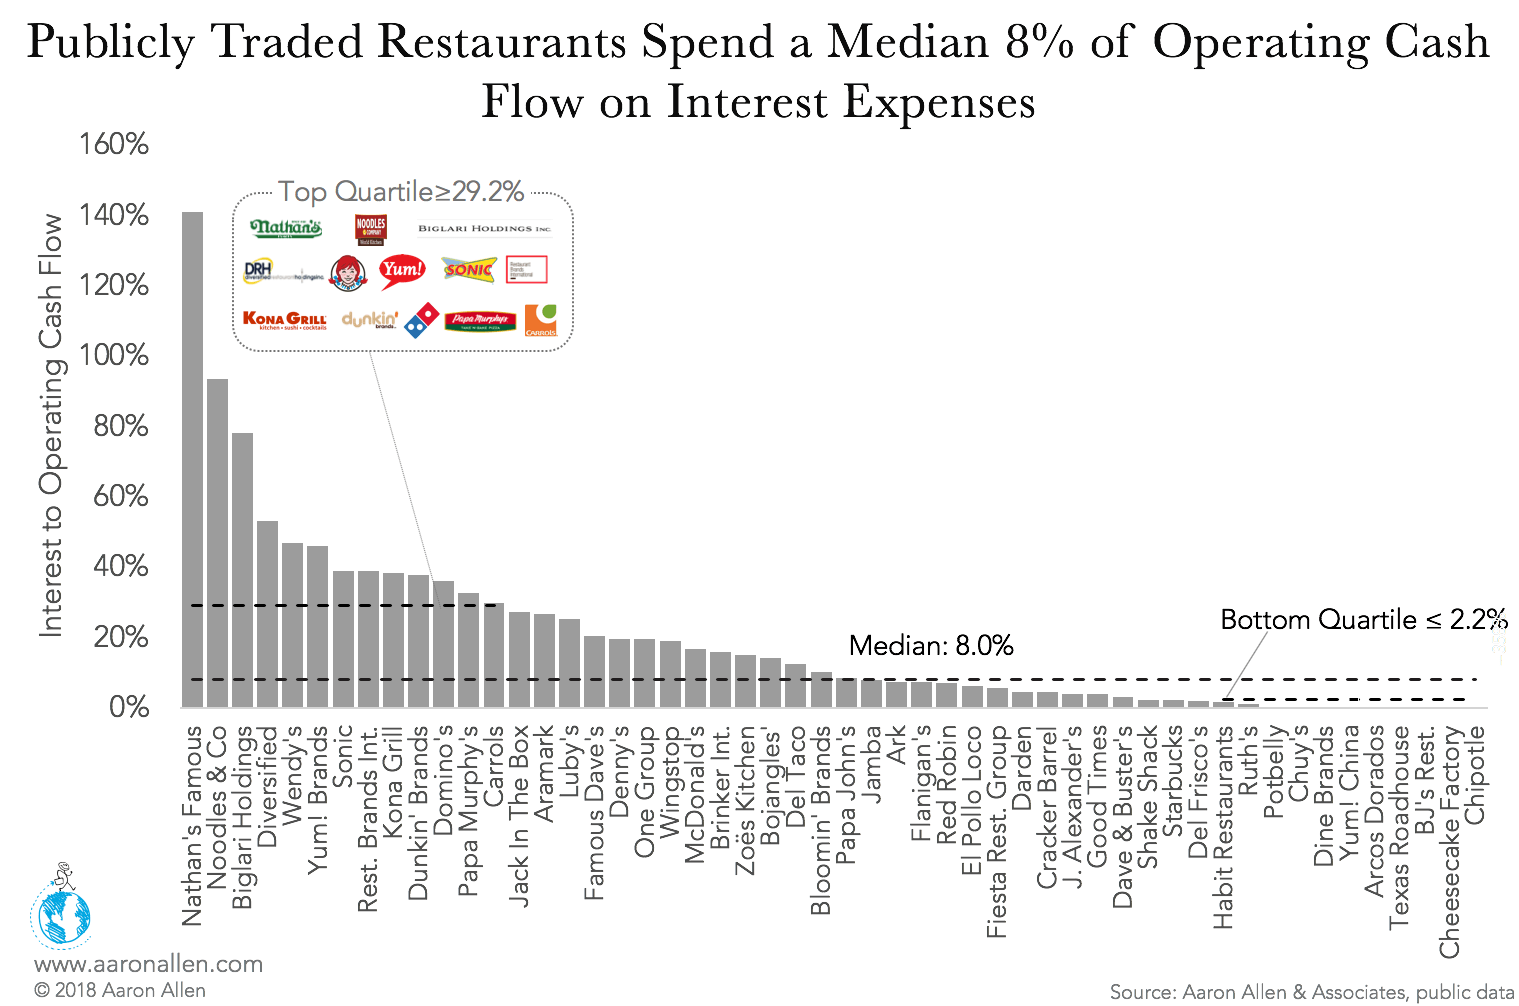 Publicly traded restaurants spend a median 8% of operating cash flow on interest expenses